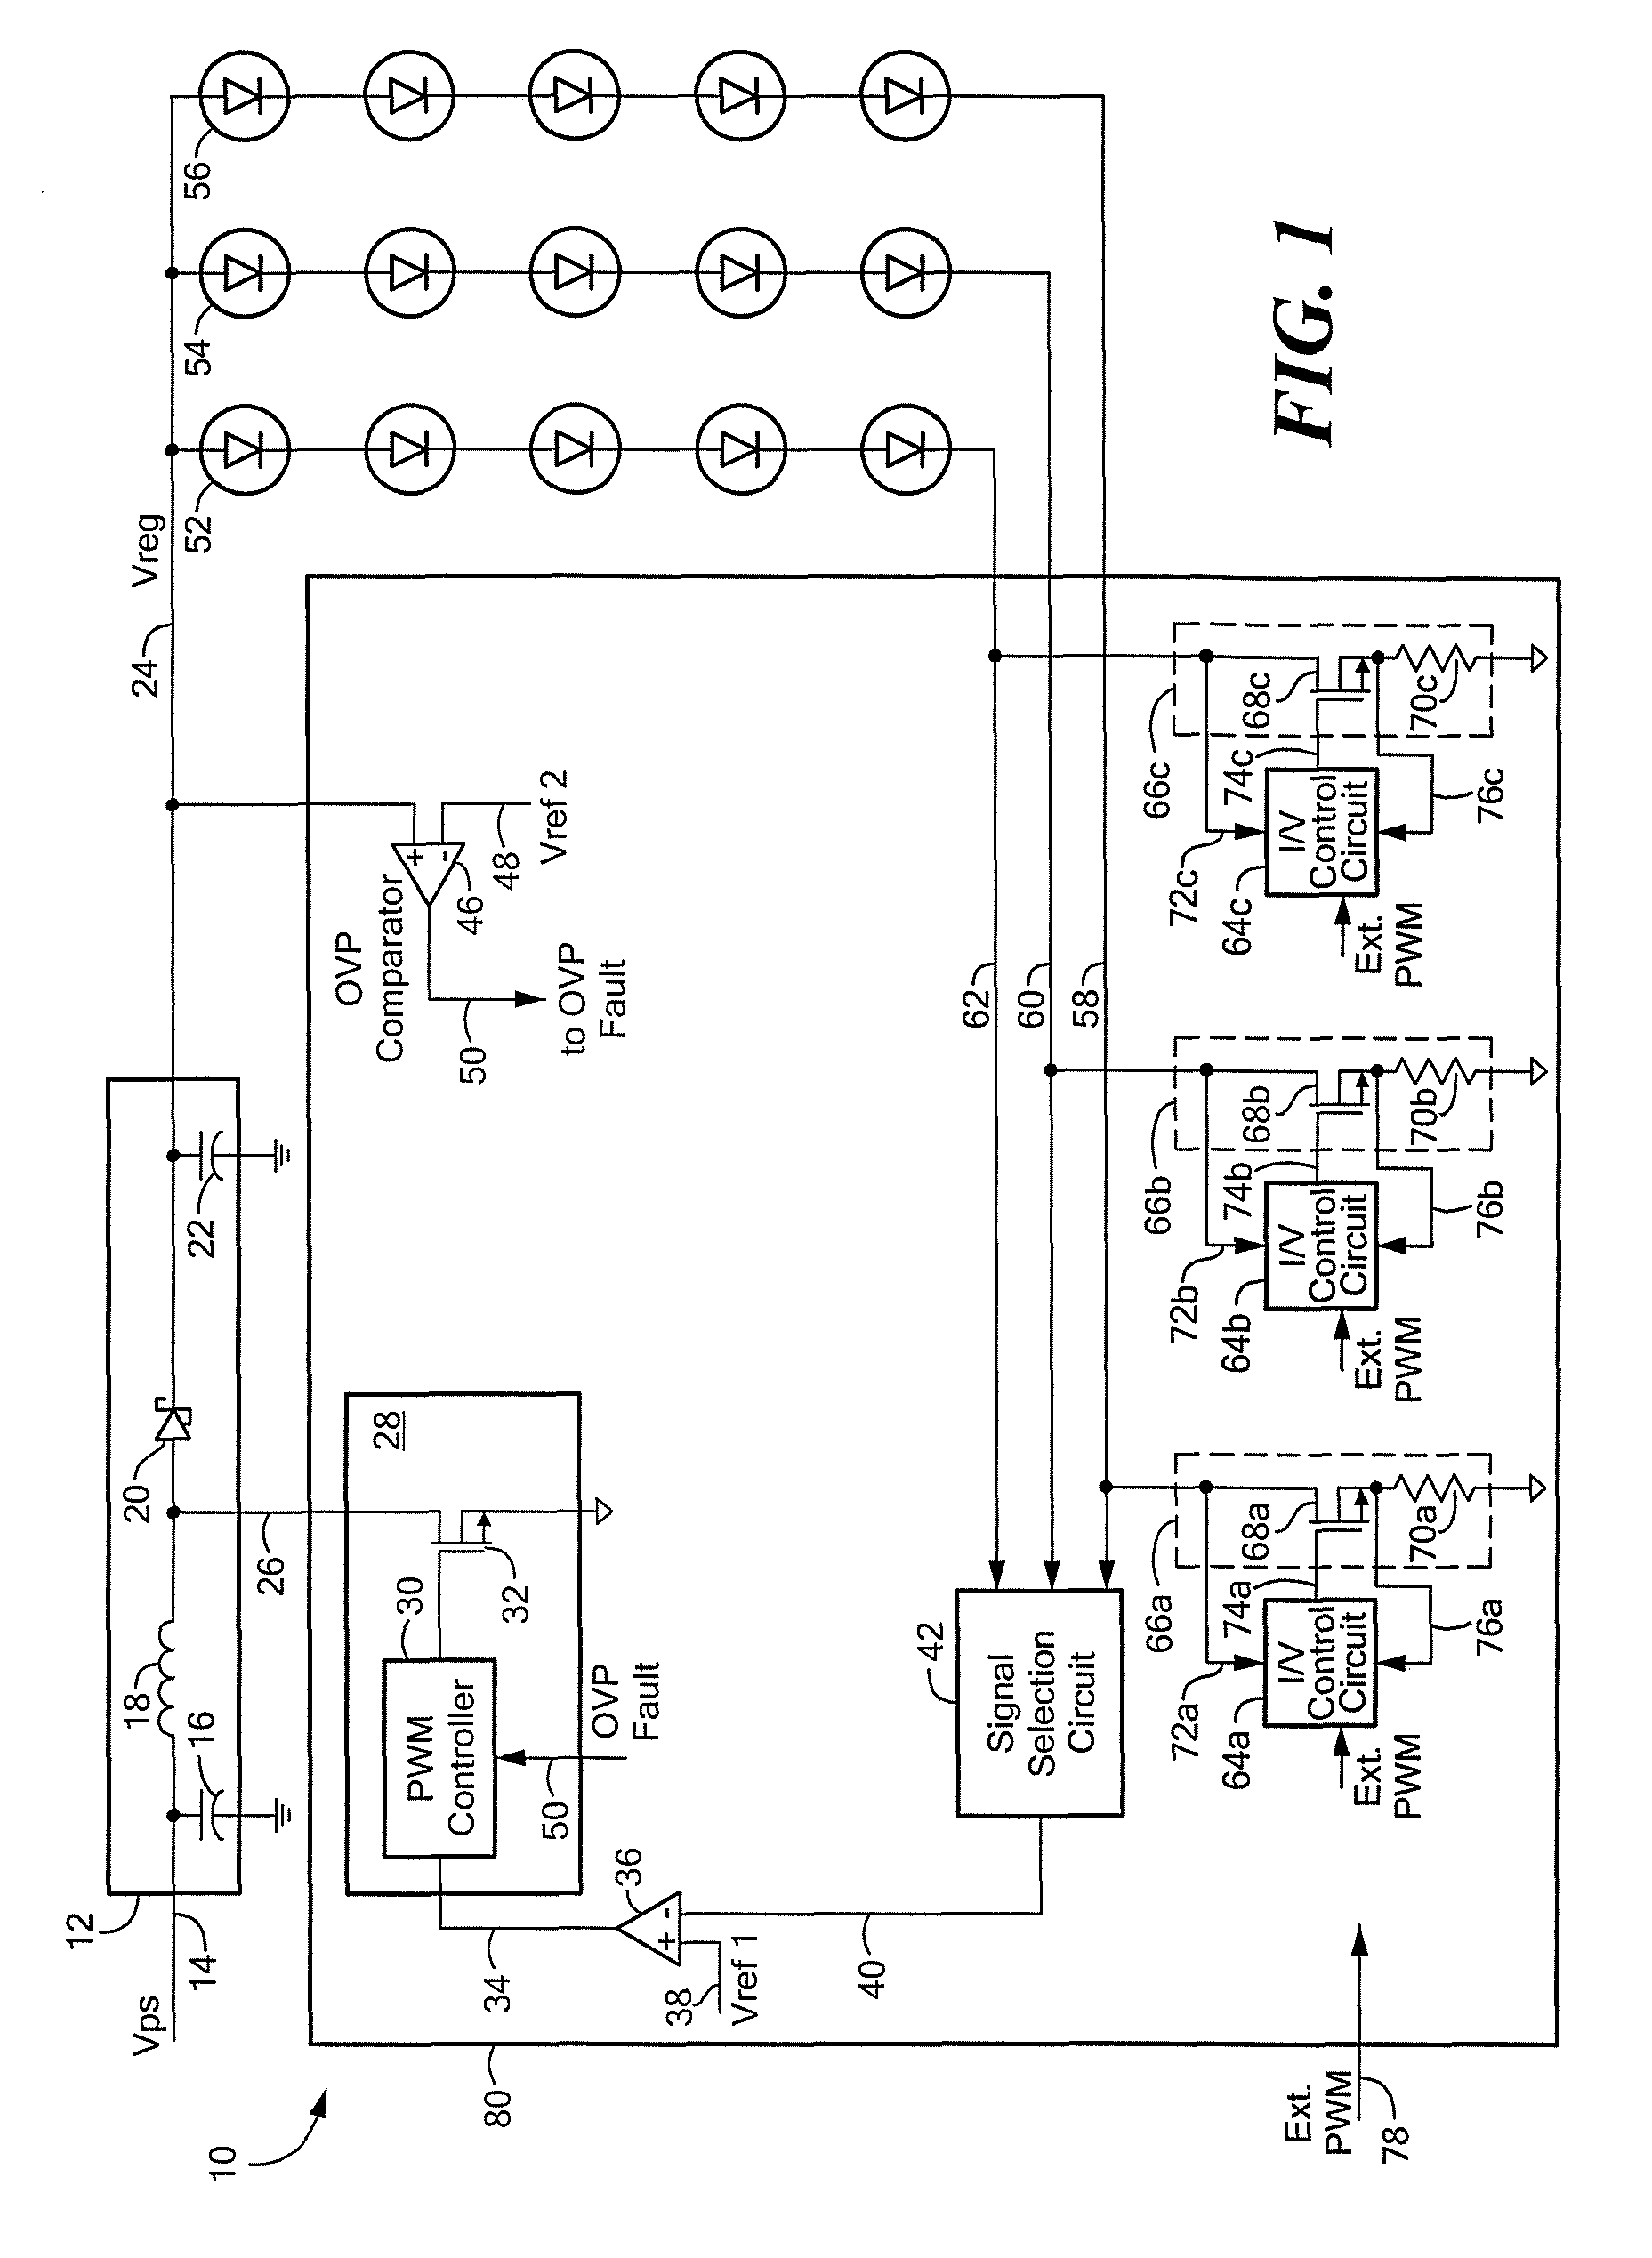 Electronic circuit for driving a diode load with a predetermined average current